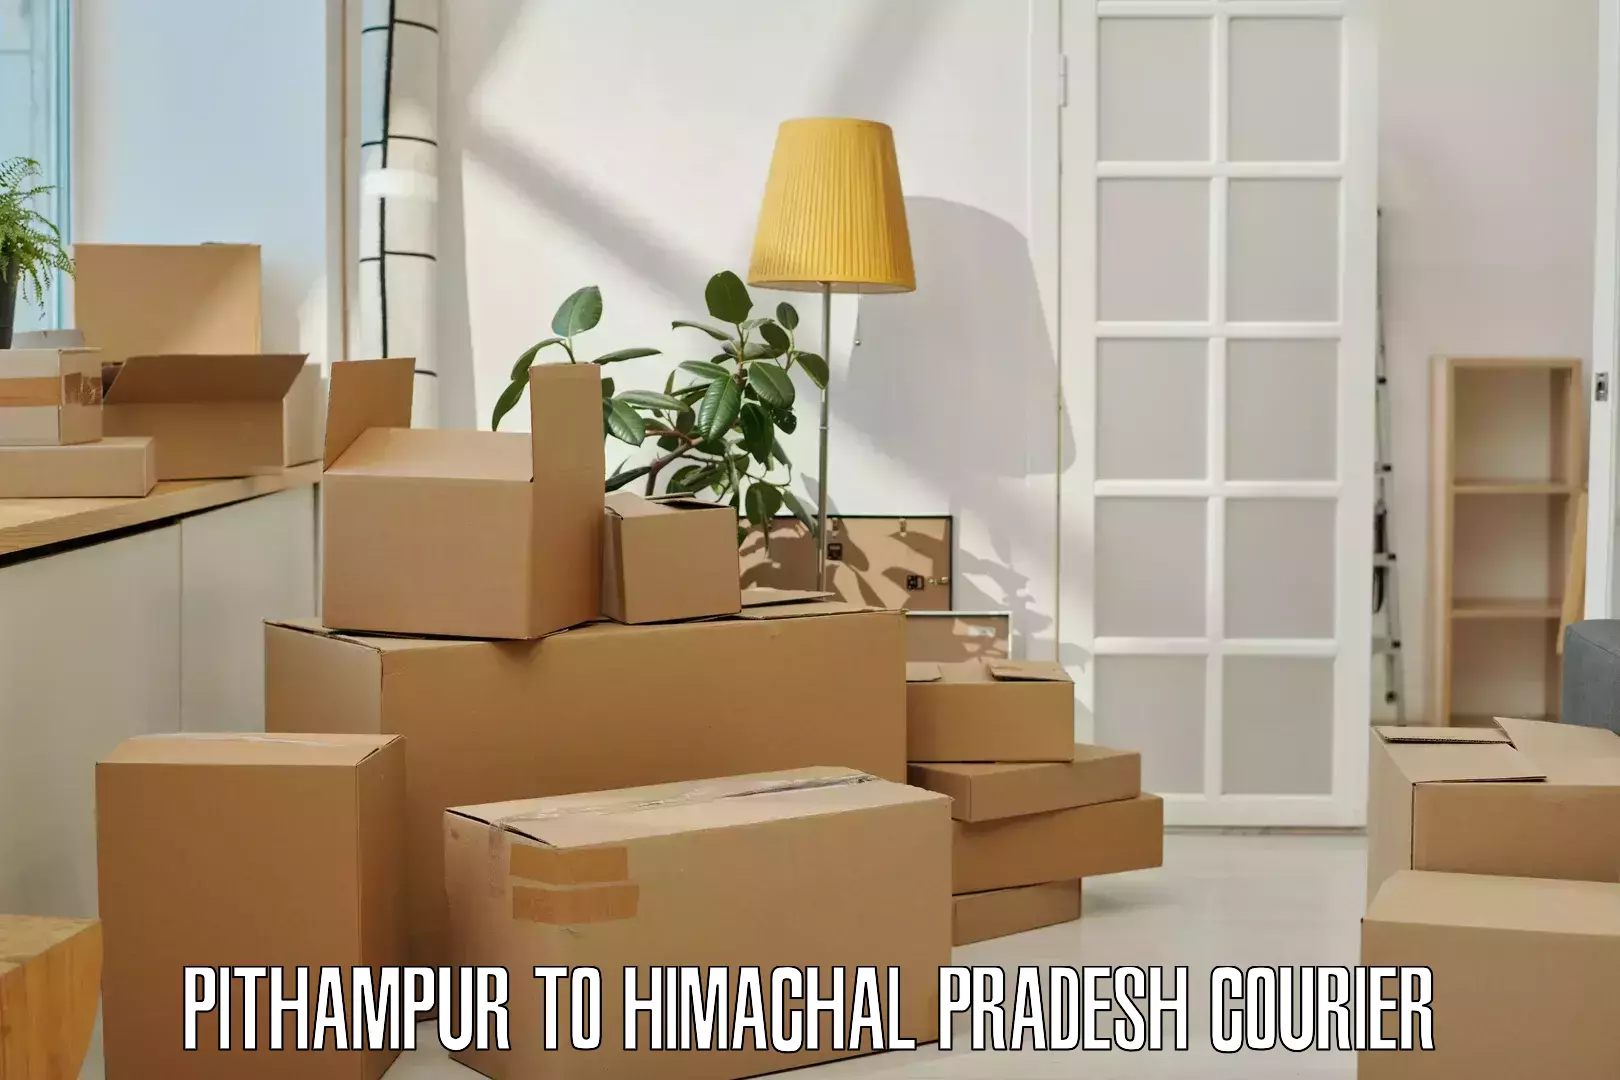 Automated parcel services Pithampur to Joginder Nagar